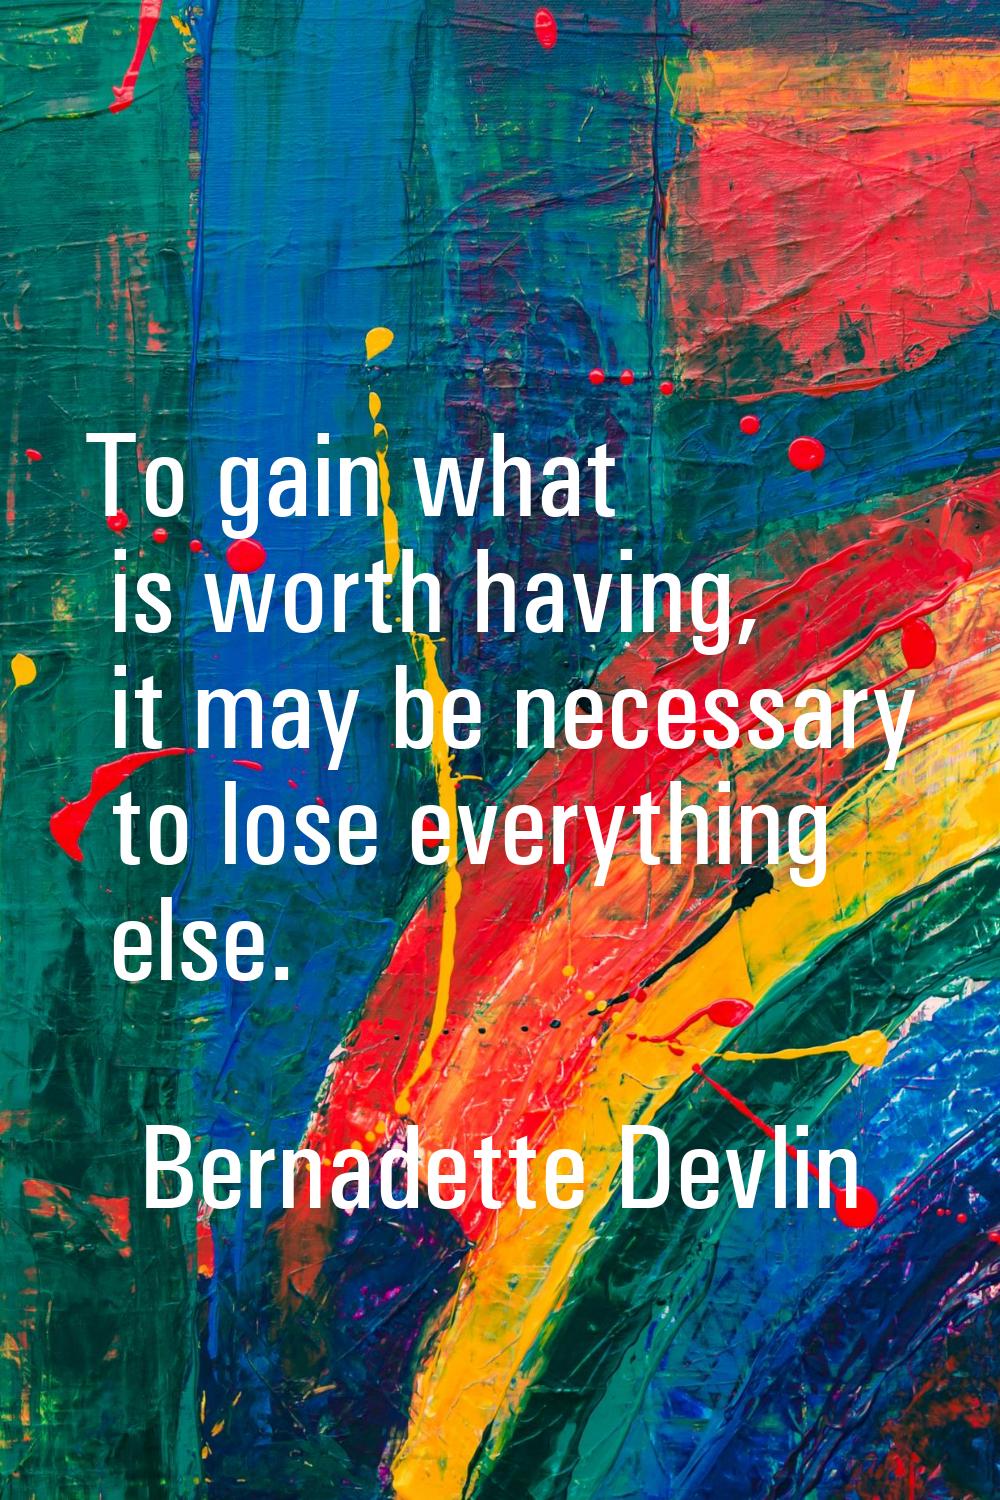 To gain what is worth having, it may be necessary to lose everything else.